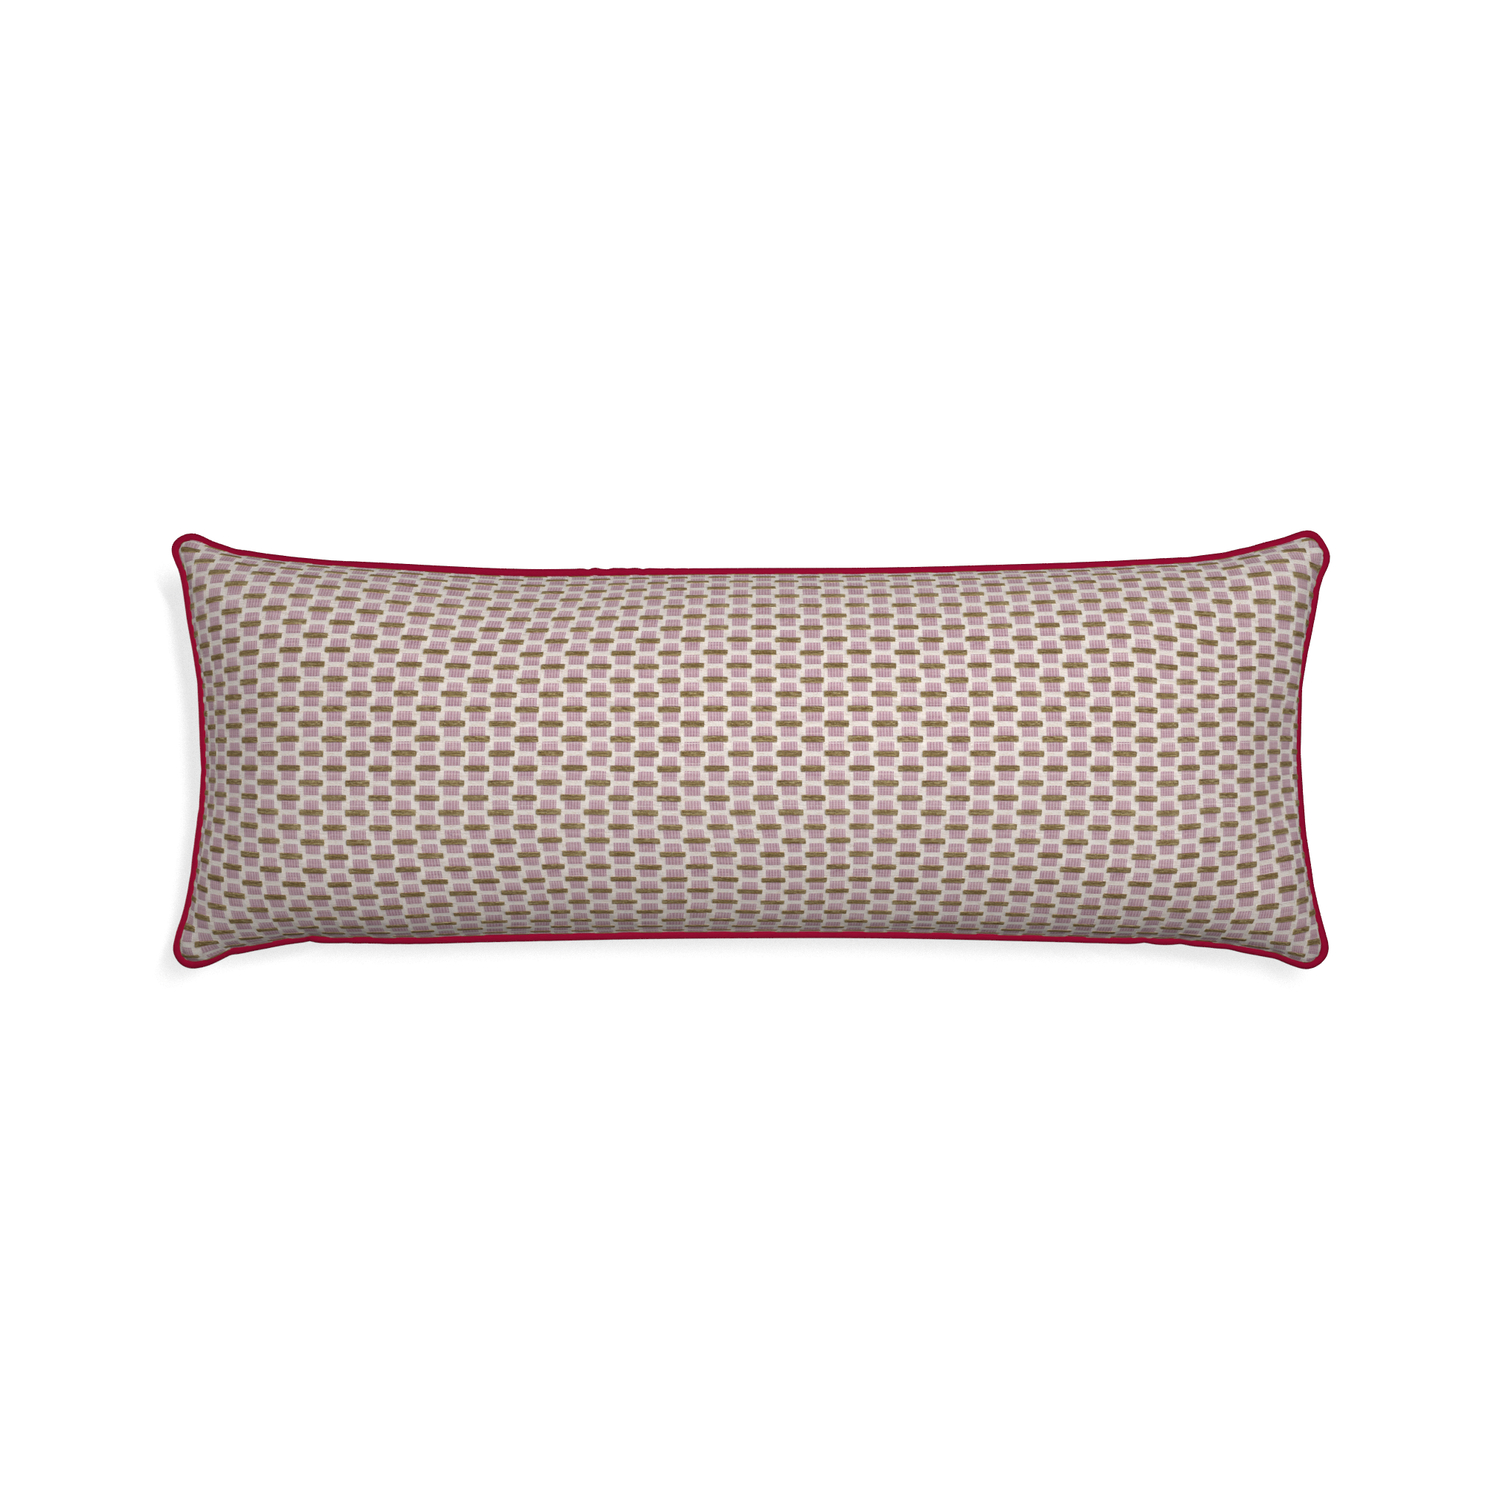 Xl-lumbar willow orchid custom pink geometric chenillepillow with raspberry piping on white background